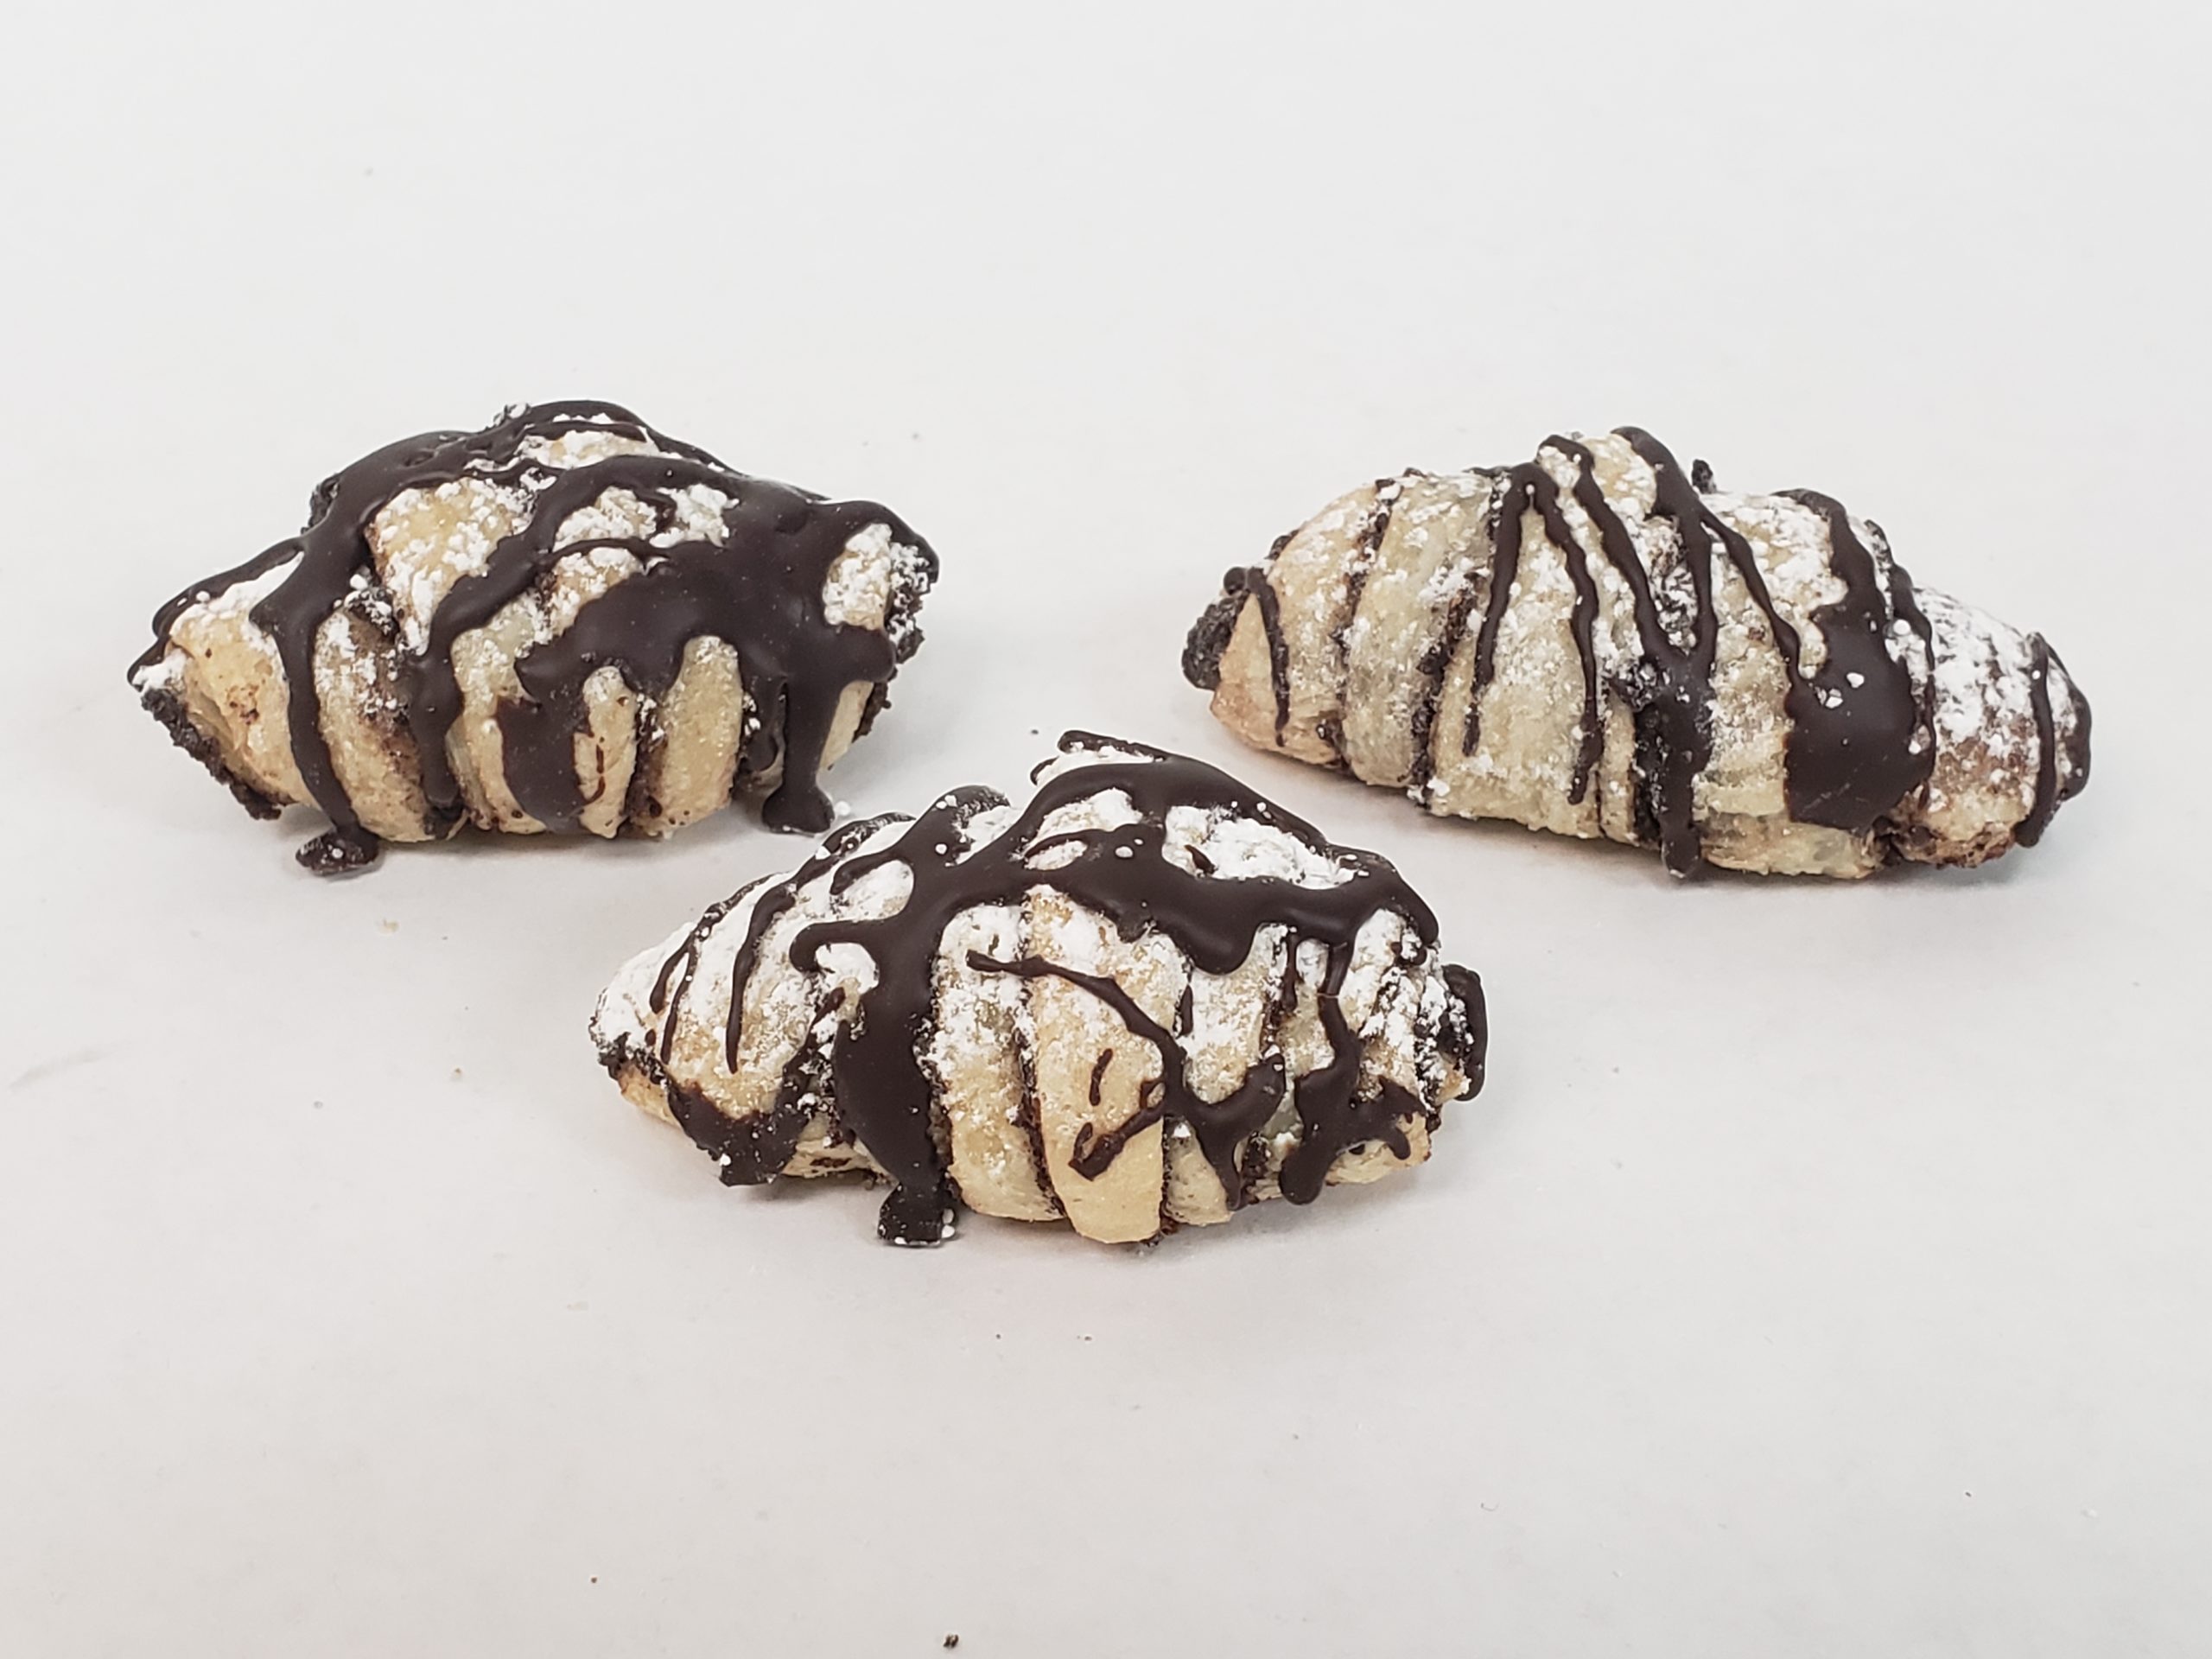 Chocolate Pastry Rugelach